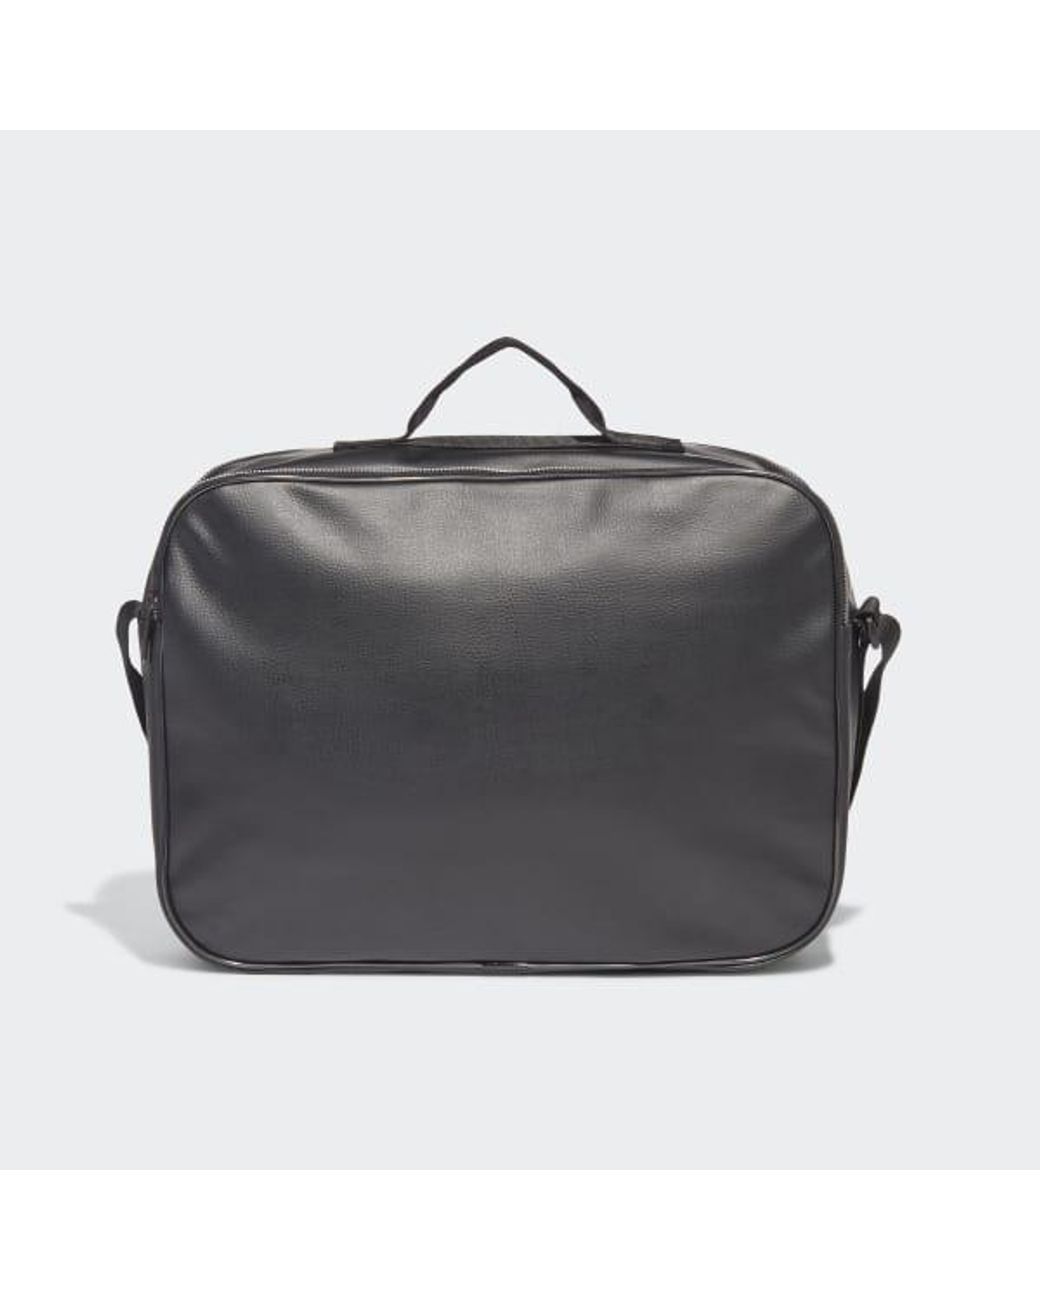 adidas Synthetic Vintage Airliner Bag in Black - Lyst